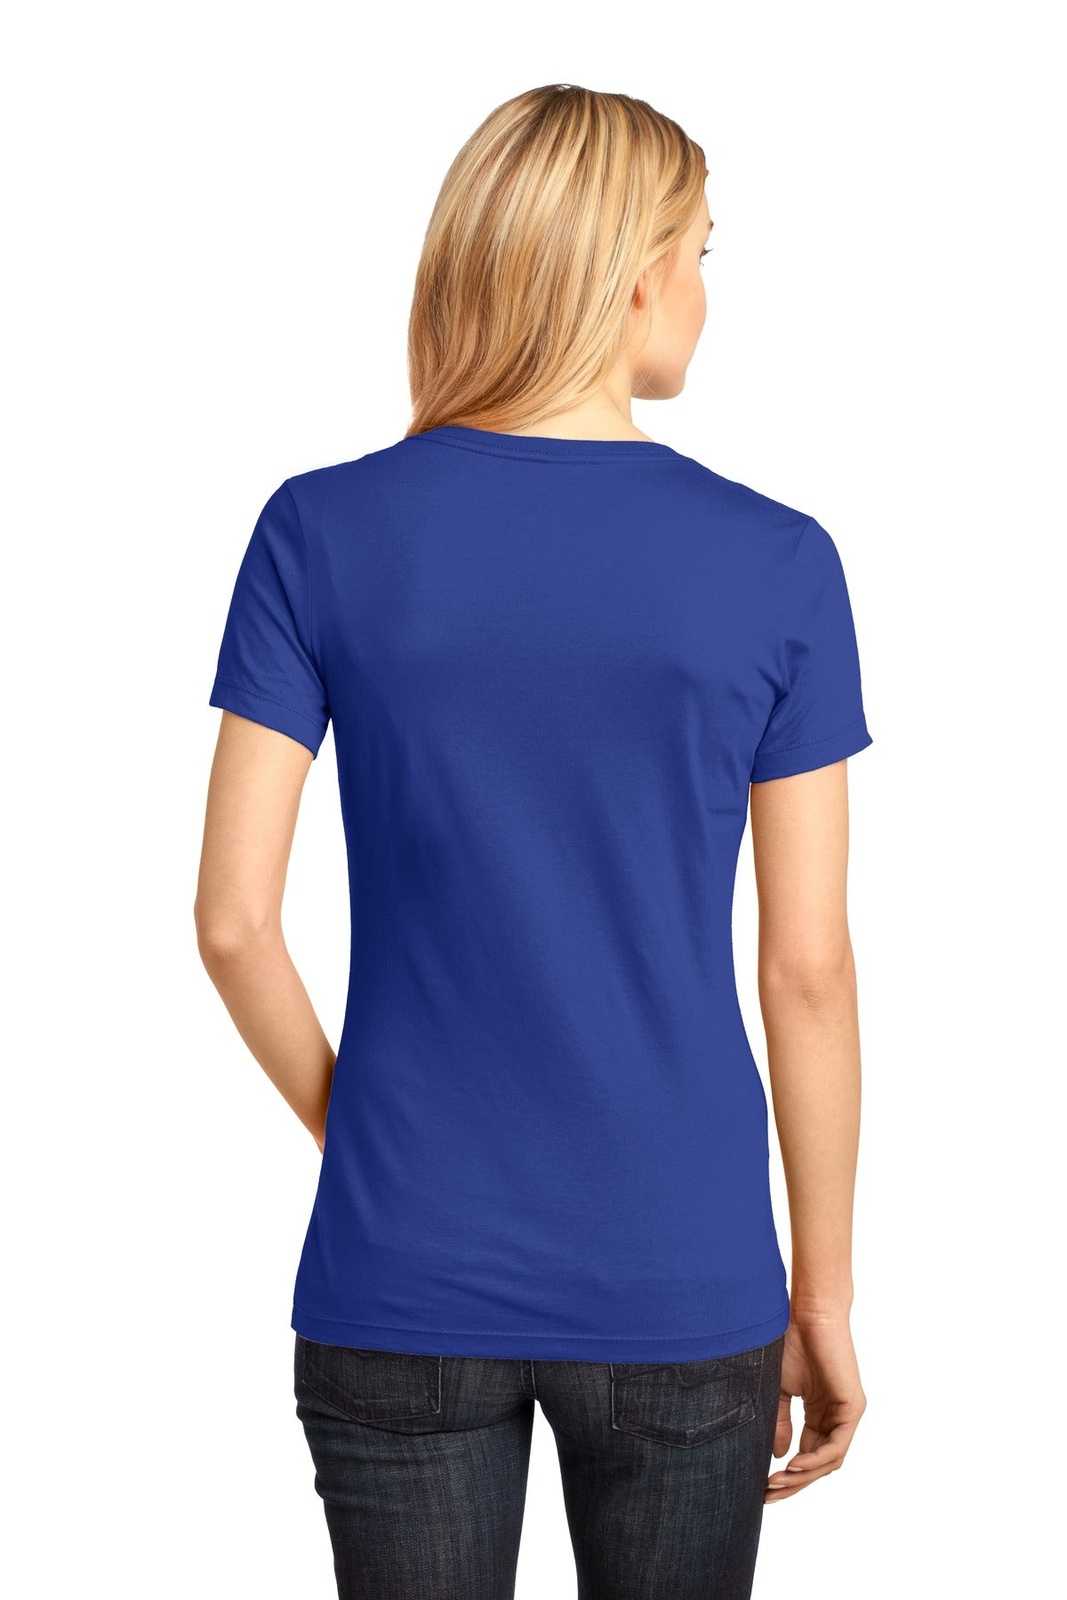 District DM1170L Women's Perfect Weight V-Neck Tee - Deep Royal - HIT a Double - 1